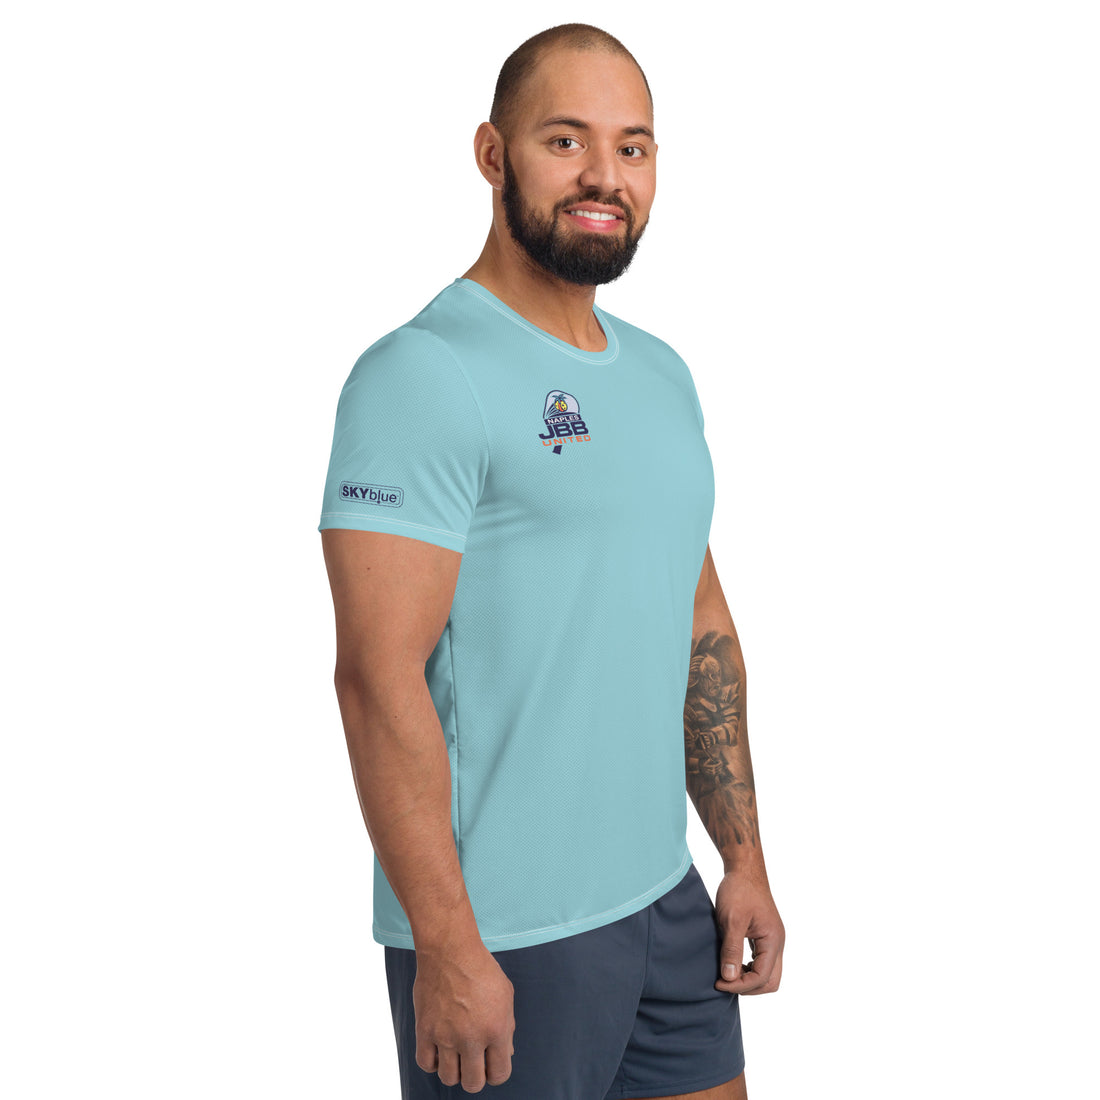 Naples JBB United™ Series of the Stars Men's Training Shirt Where the legacy is honored™ light seafoam green